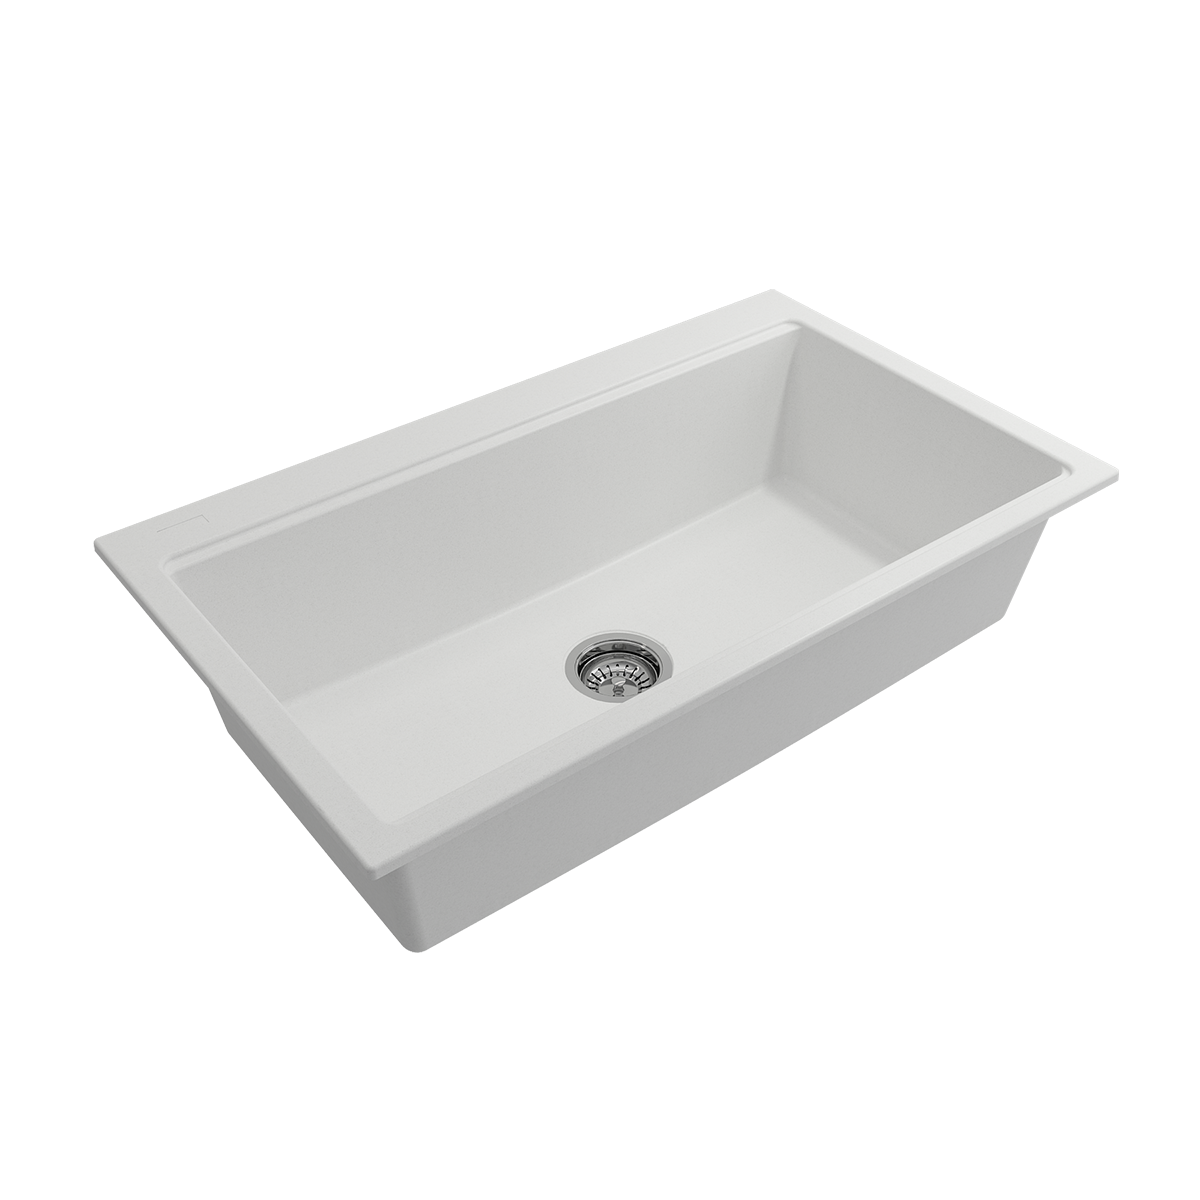 BAVENO LUX 34 with Covers Hideaway Undermount/Drop-In Granite 34 with HPL  Covers 1616-504-0126HP - BOCCHI